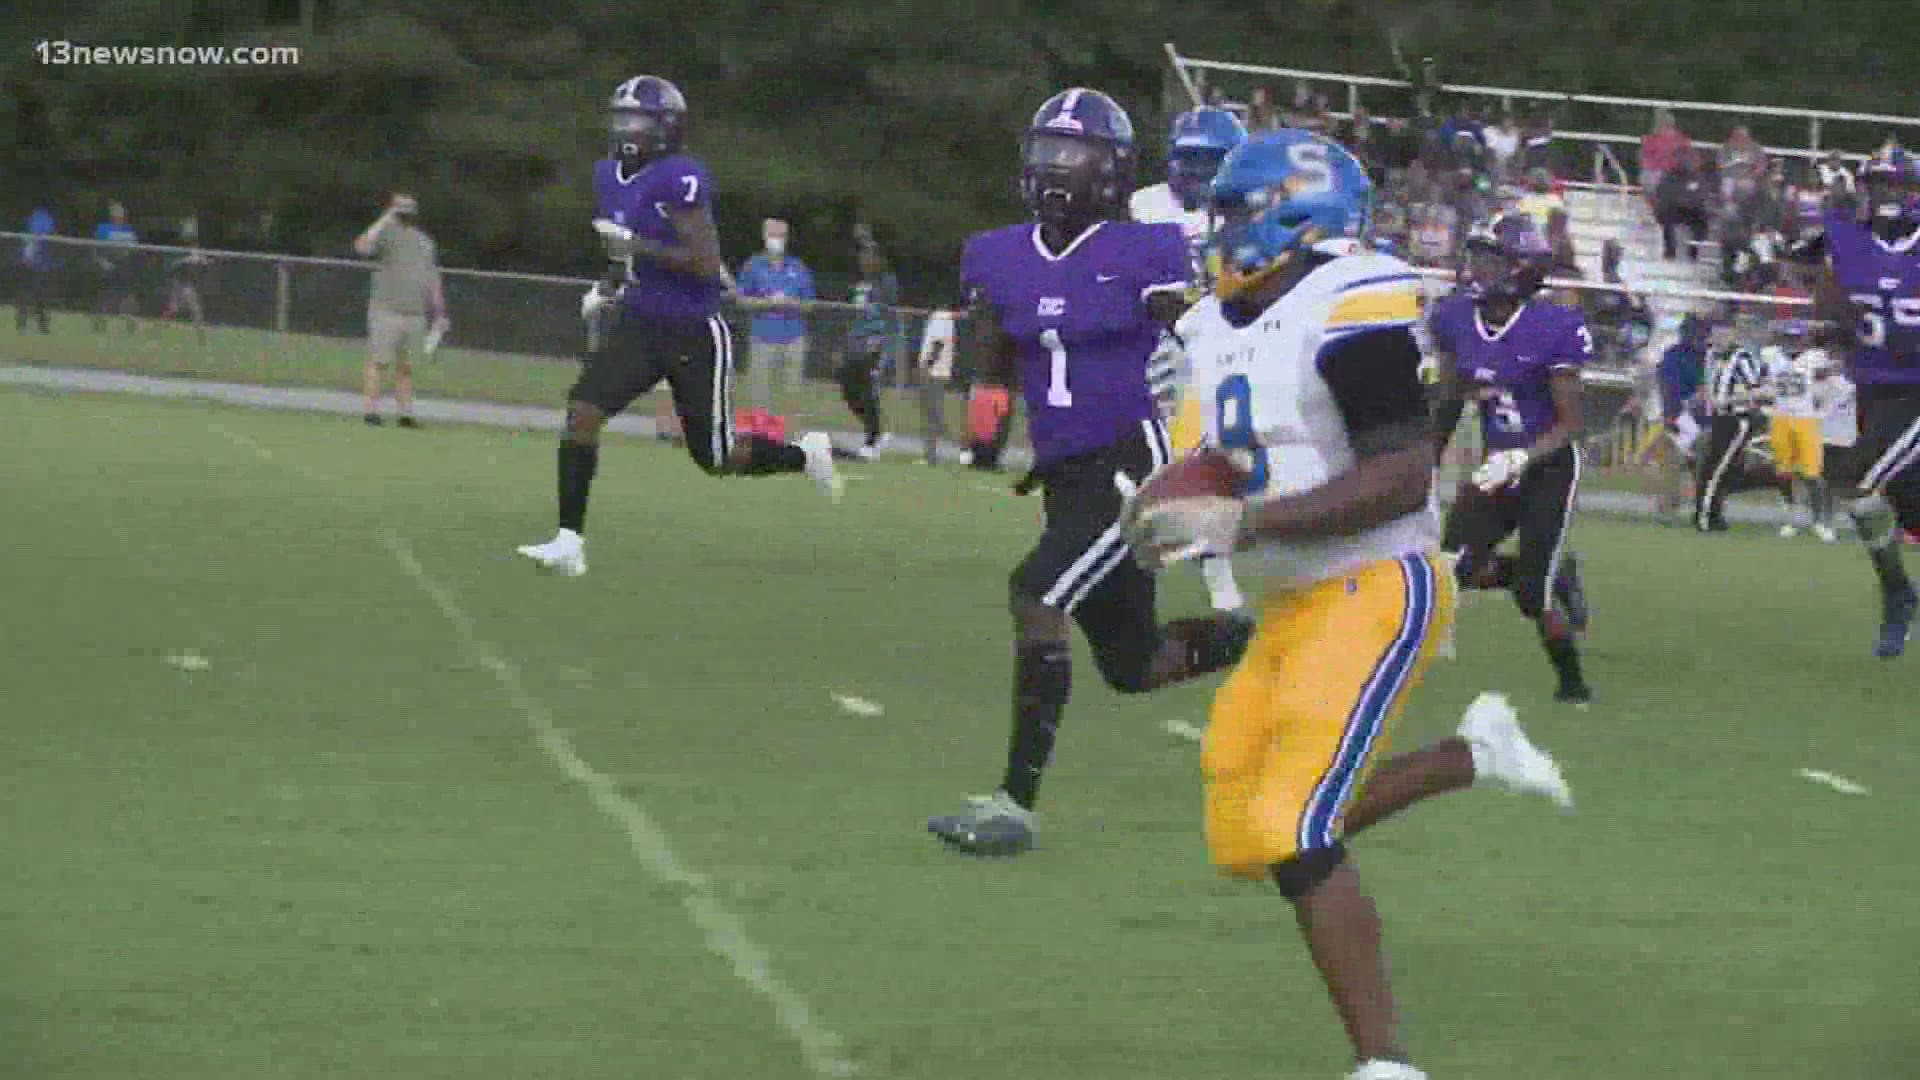 Oscar Smith dominated as they rolled past Deep Creek on opening night of high school football 49-3.